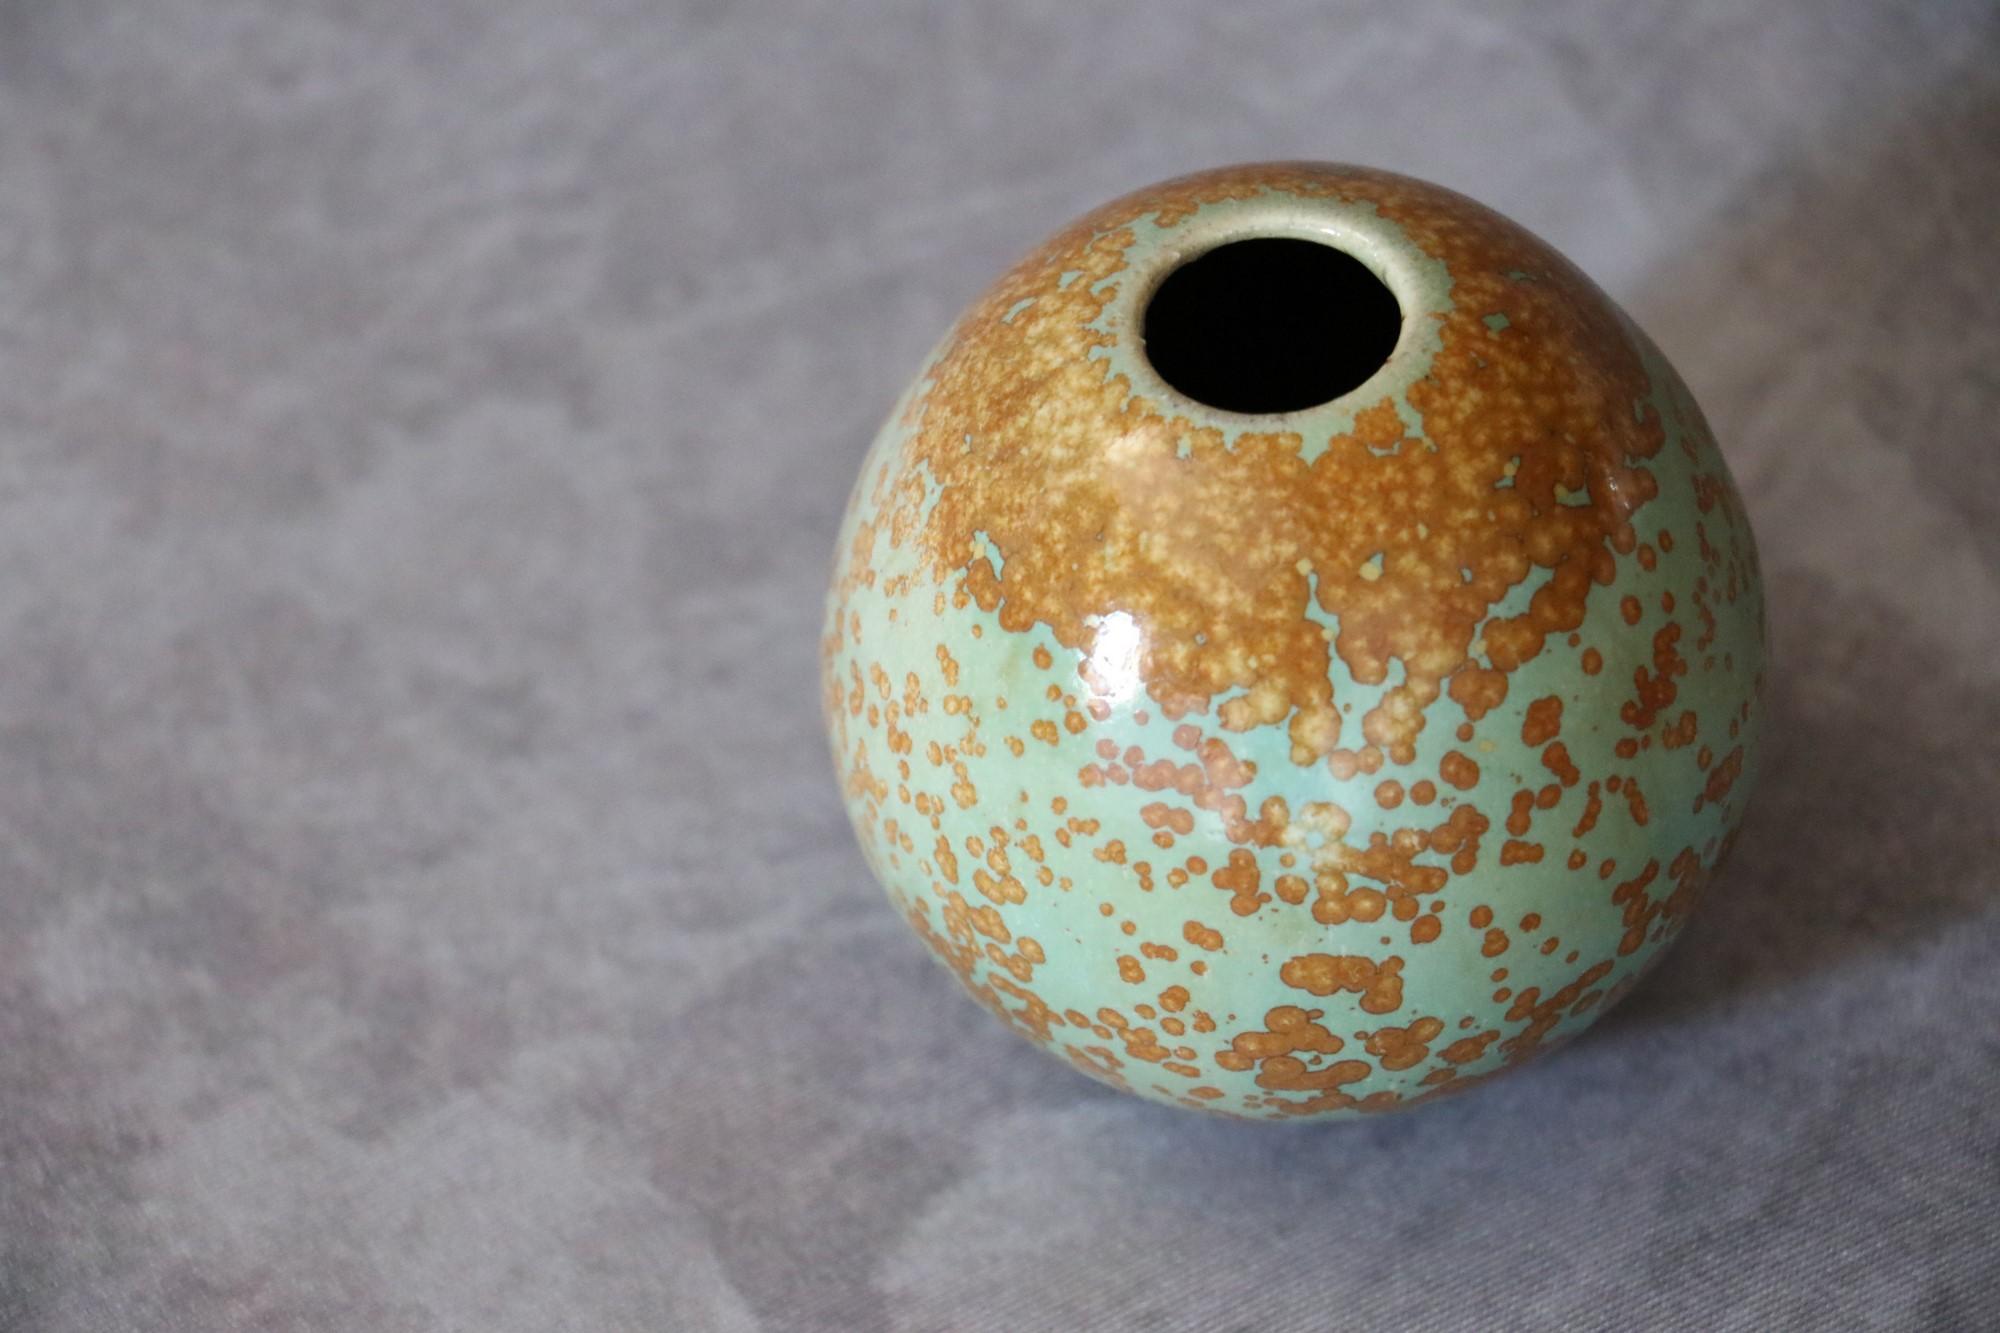 French ceramic ball vase with nucleations by Monique Cavallini - Circa 2000

Very delicately glazed ball vase in soft plant-inspired tones: earthy brown and leafy green. The vase is glazed with nucleations, similar to crystallizations, obtained